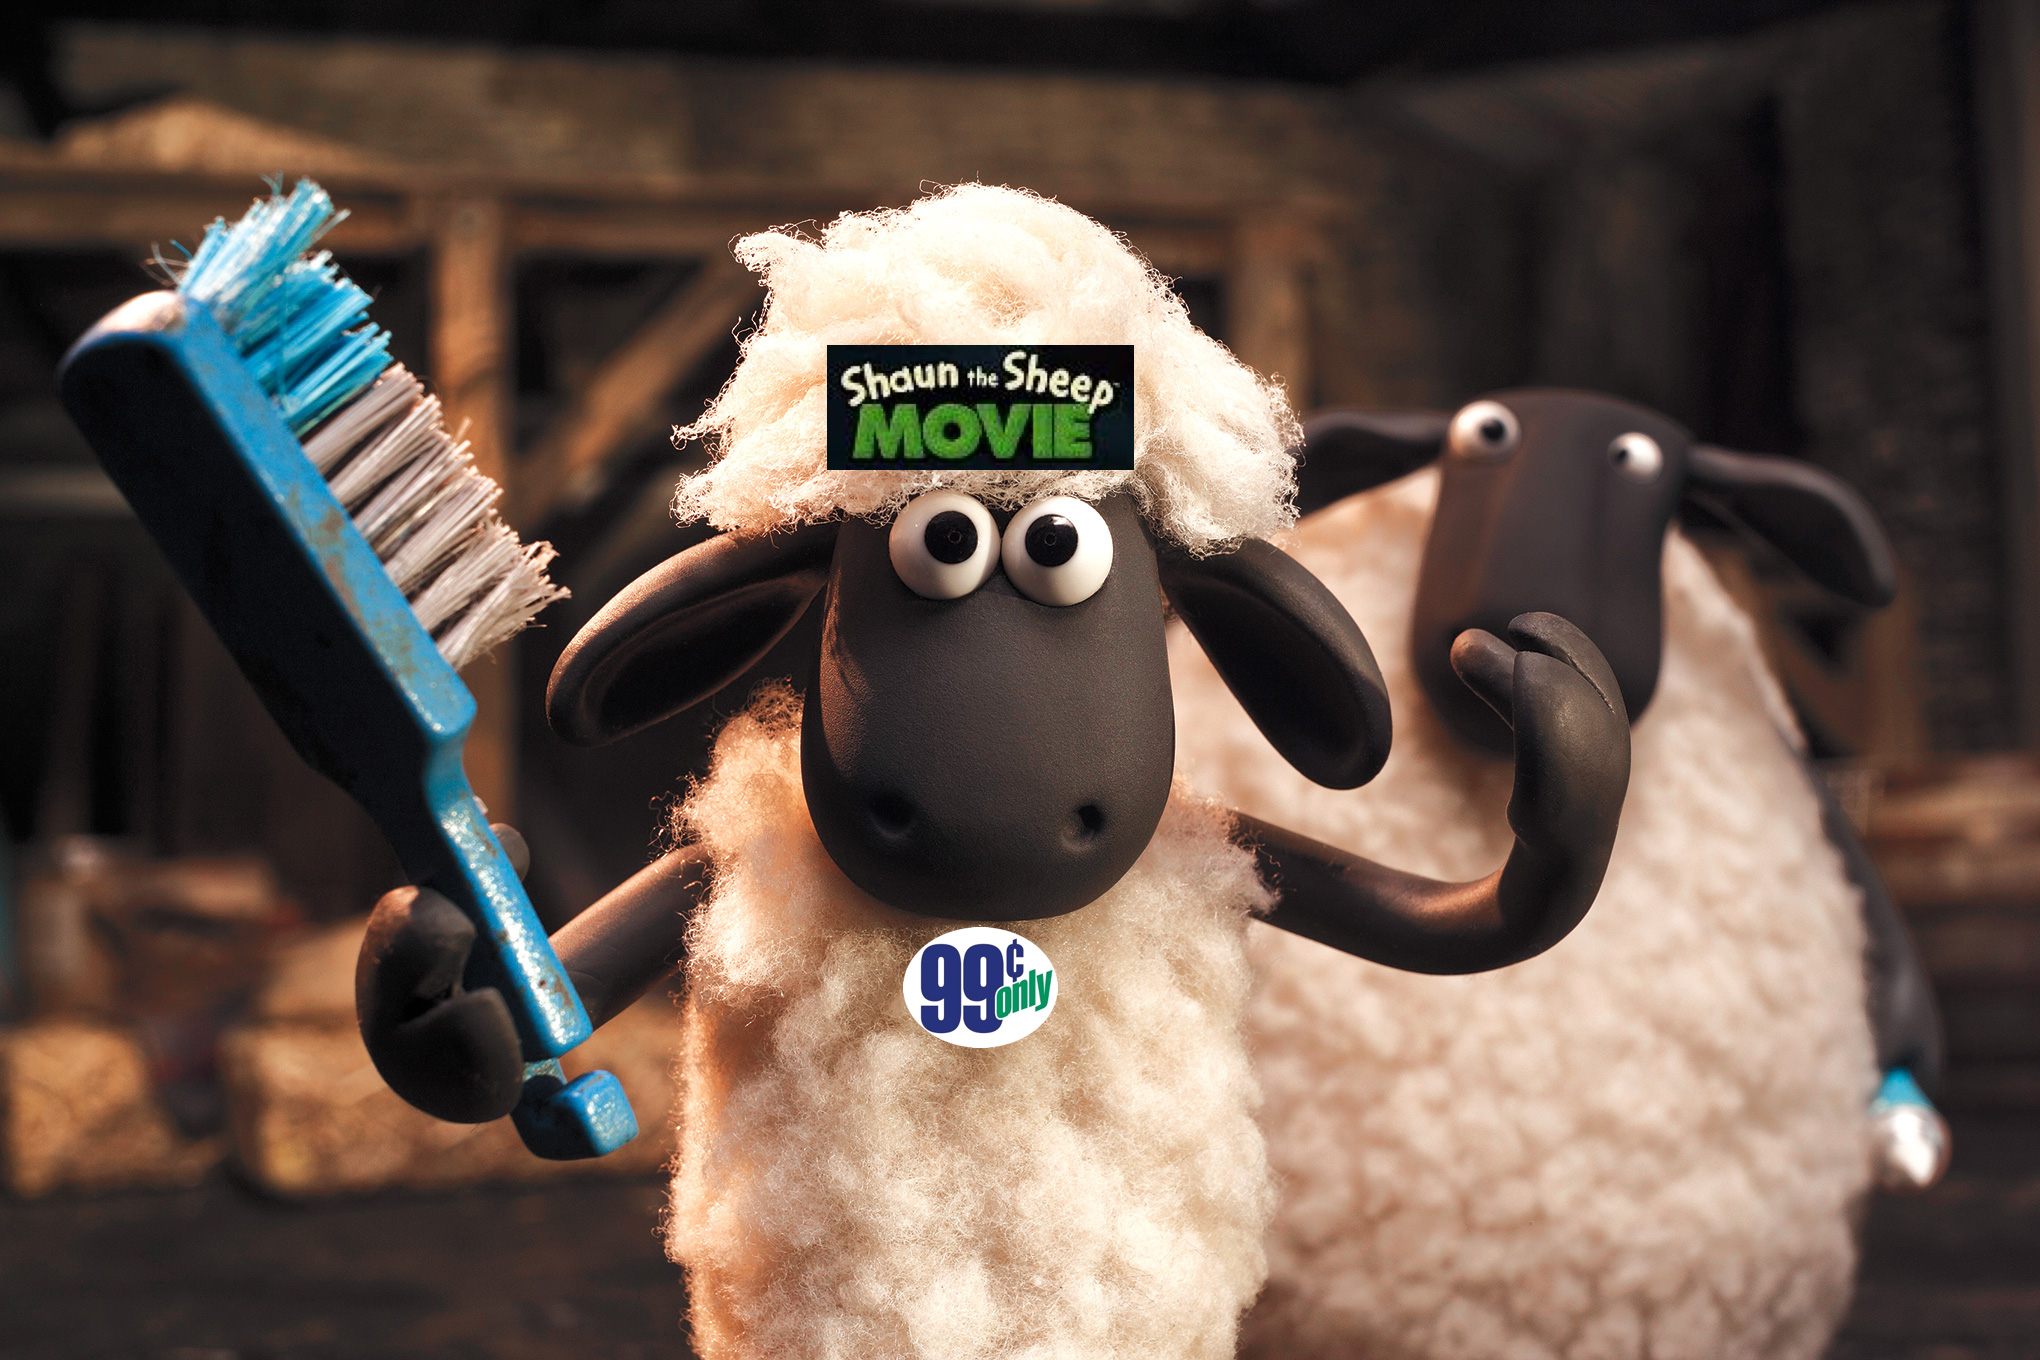 Shaun the sheep movie, itunes 99 cent movie rental of the week